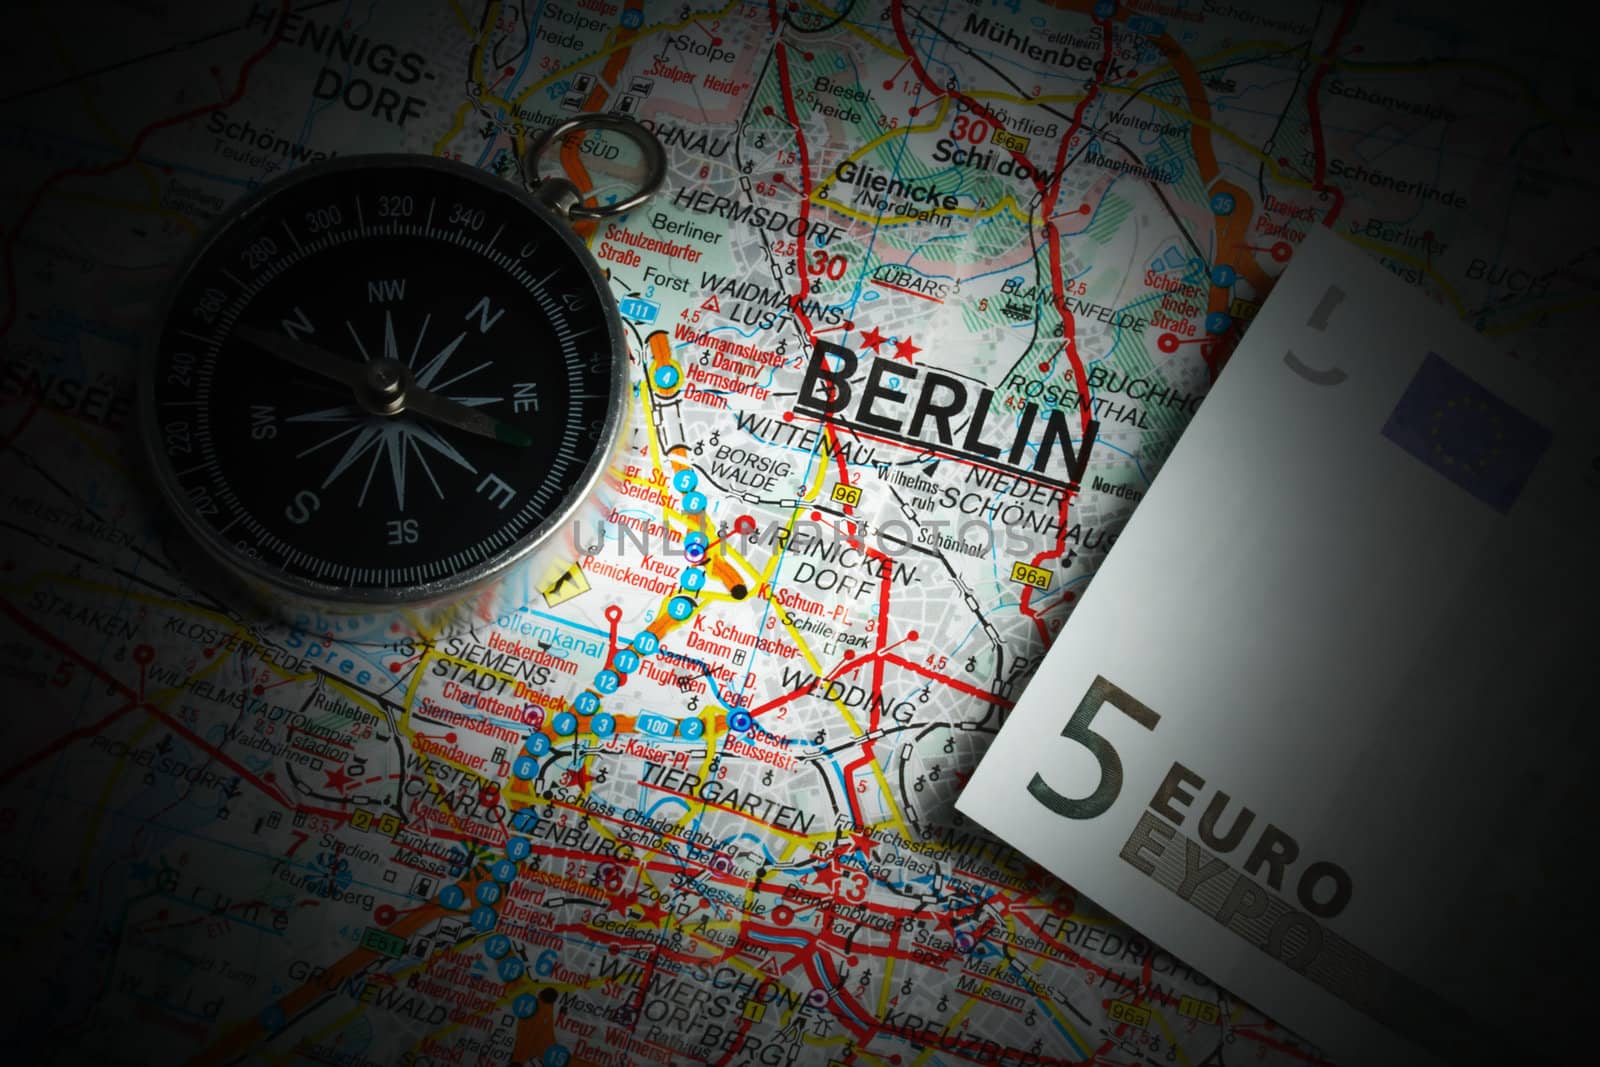 Compass and five euros on a map of Berlin